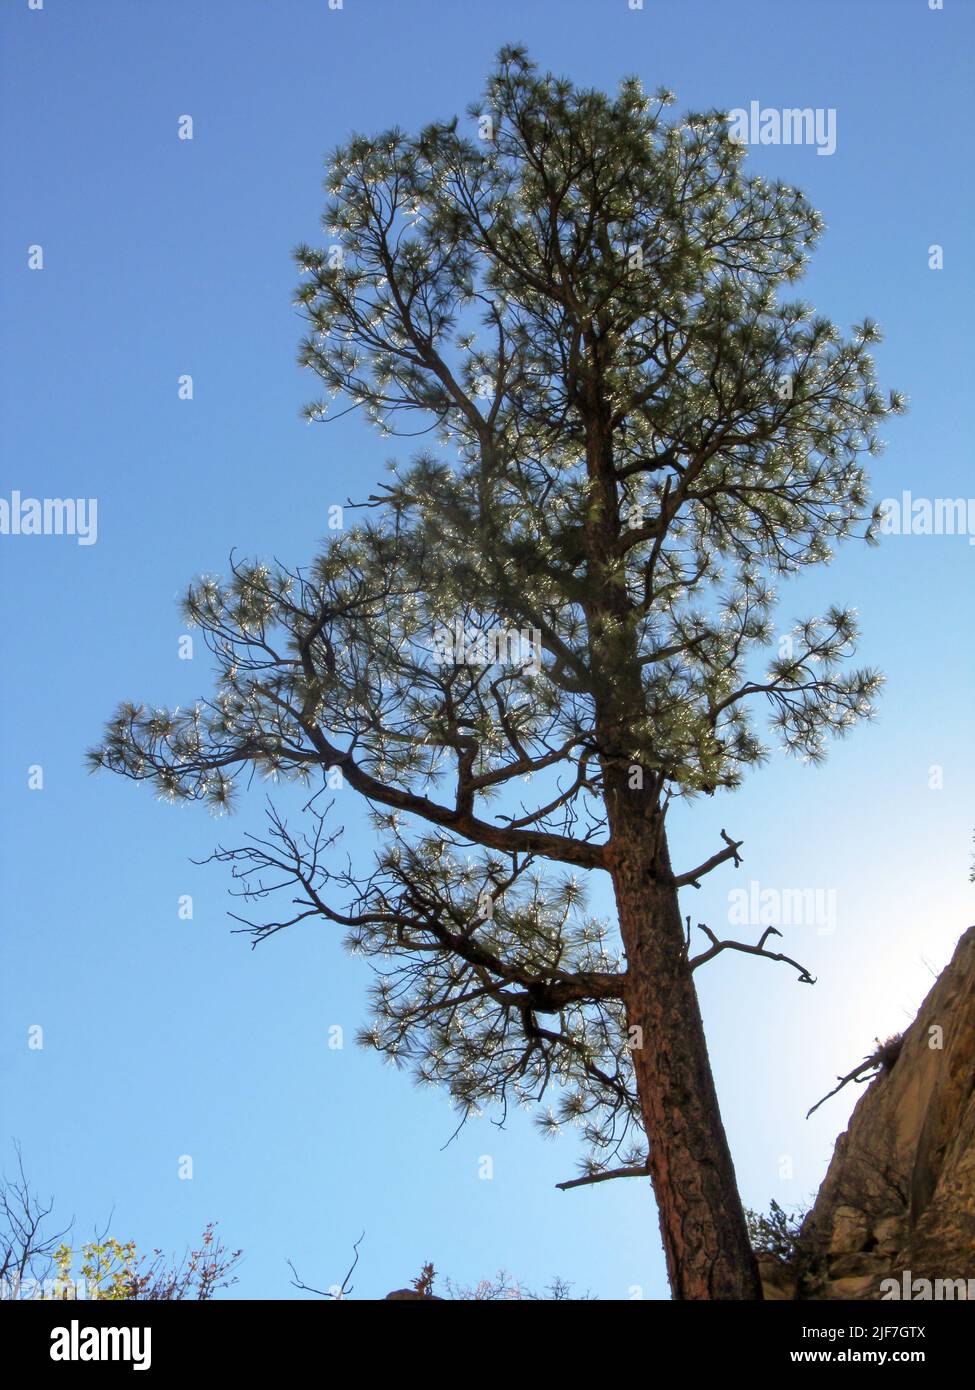 Looking up at a tall Limber Pine, Pinus Flexilis, being backlit against the bright blue sky Stock Photo